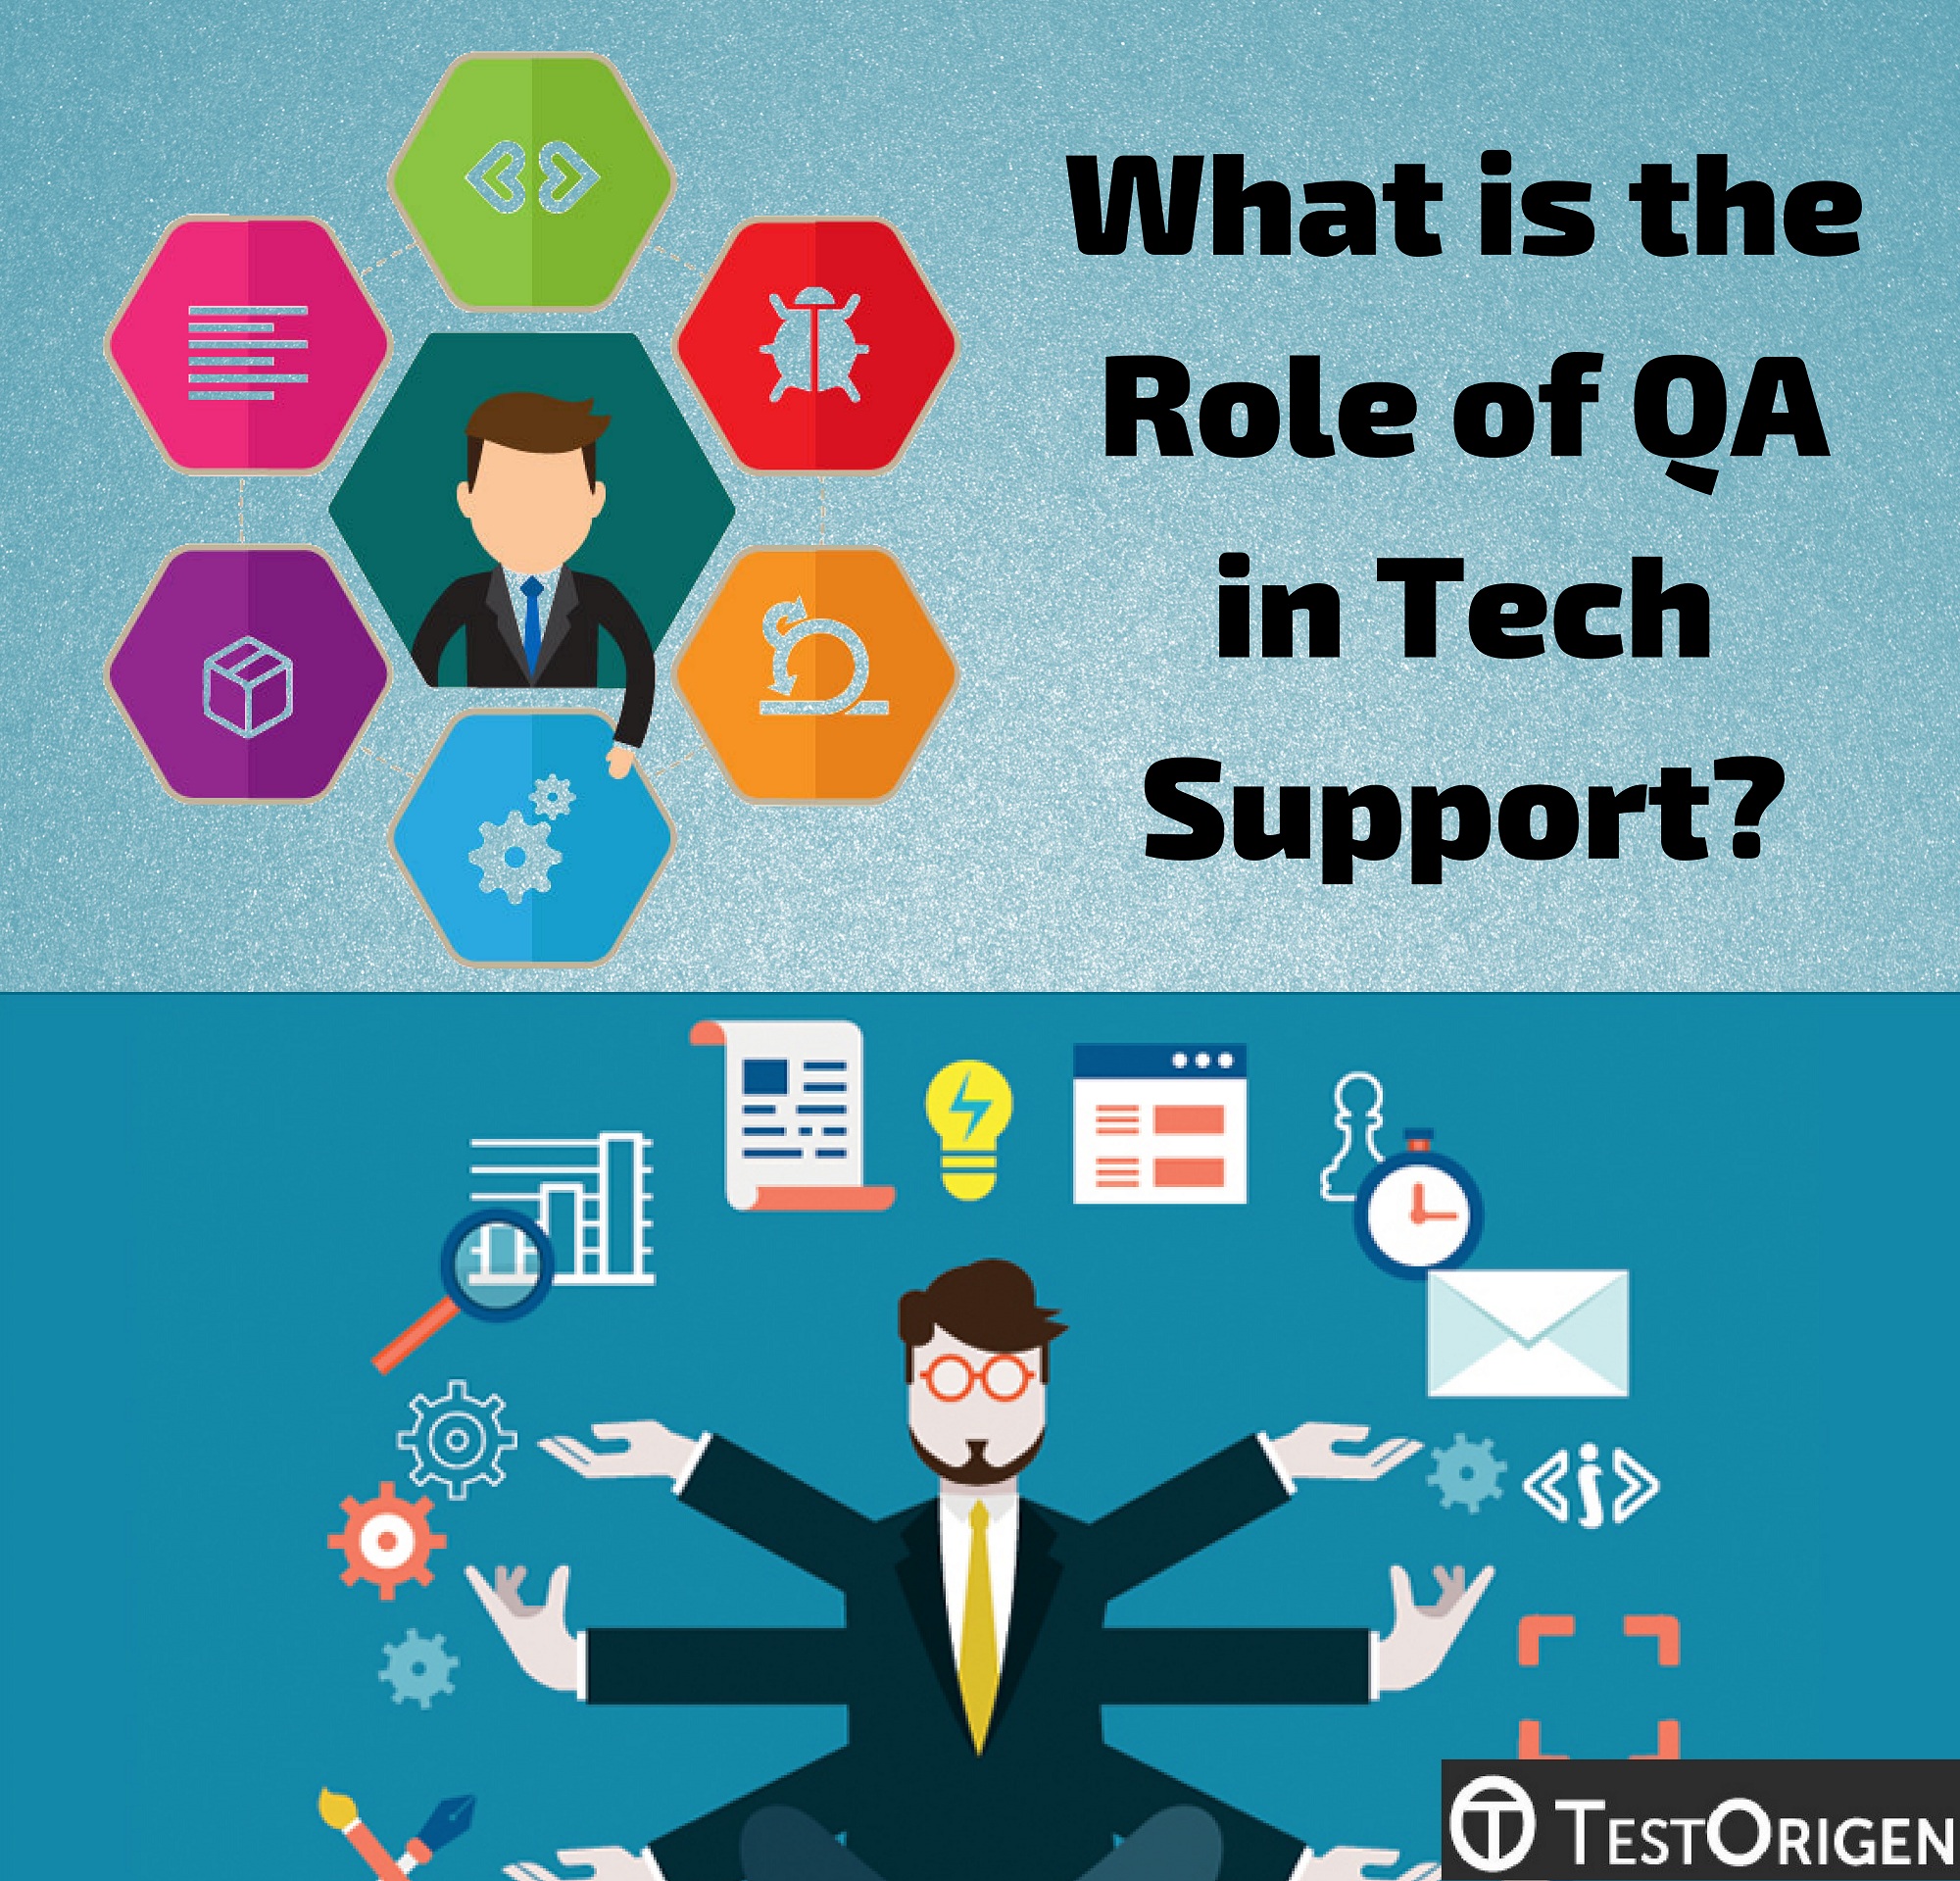 What is the Role of QA in Tech Support?